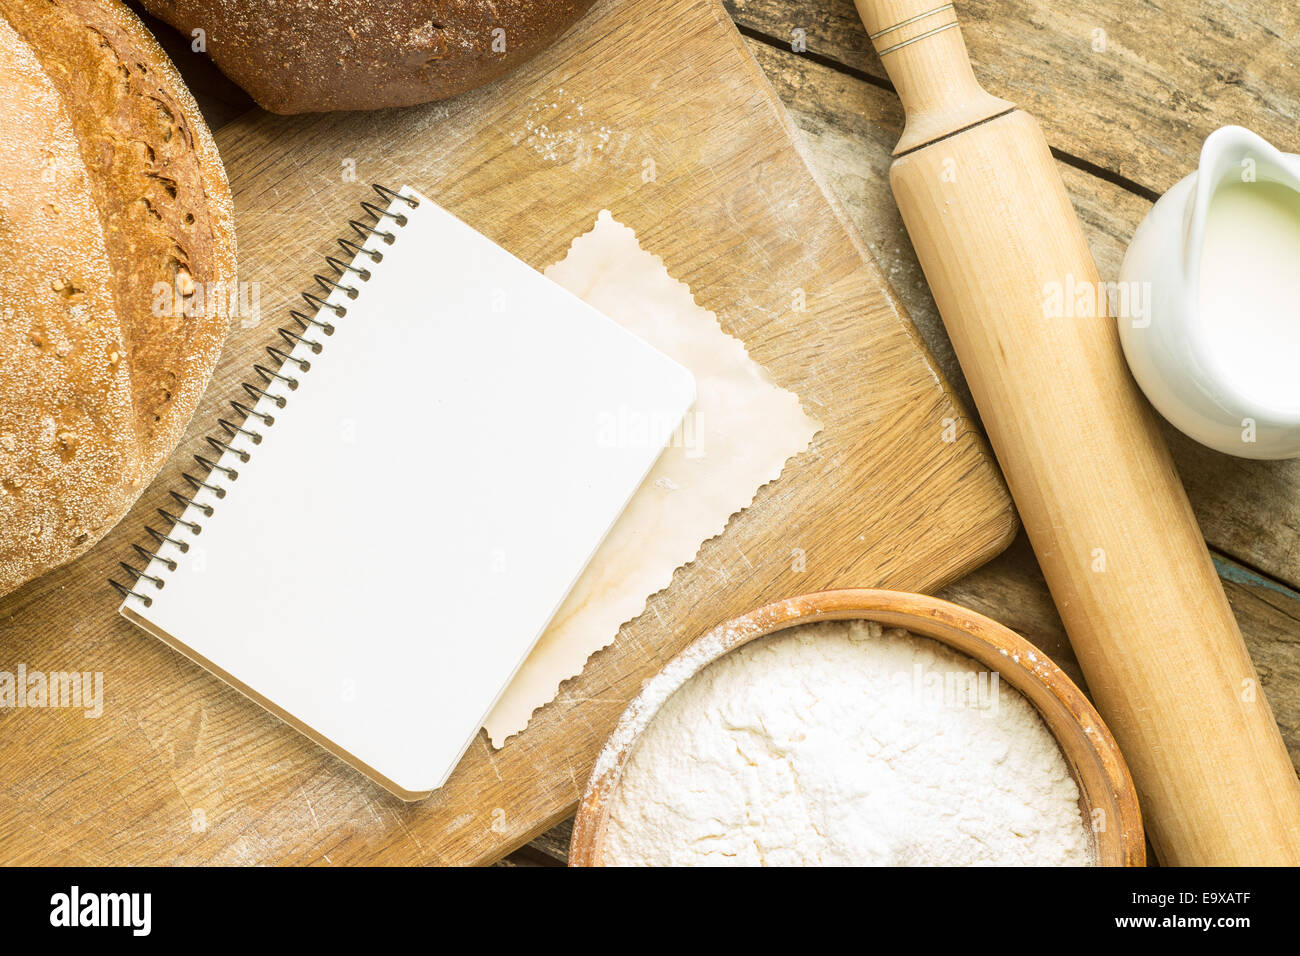 Menu background. Bakery ingredients with blank recipe book on wooden table Stock Photo